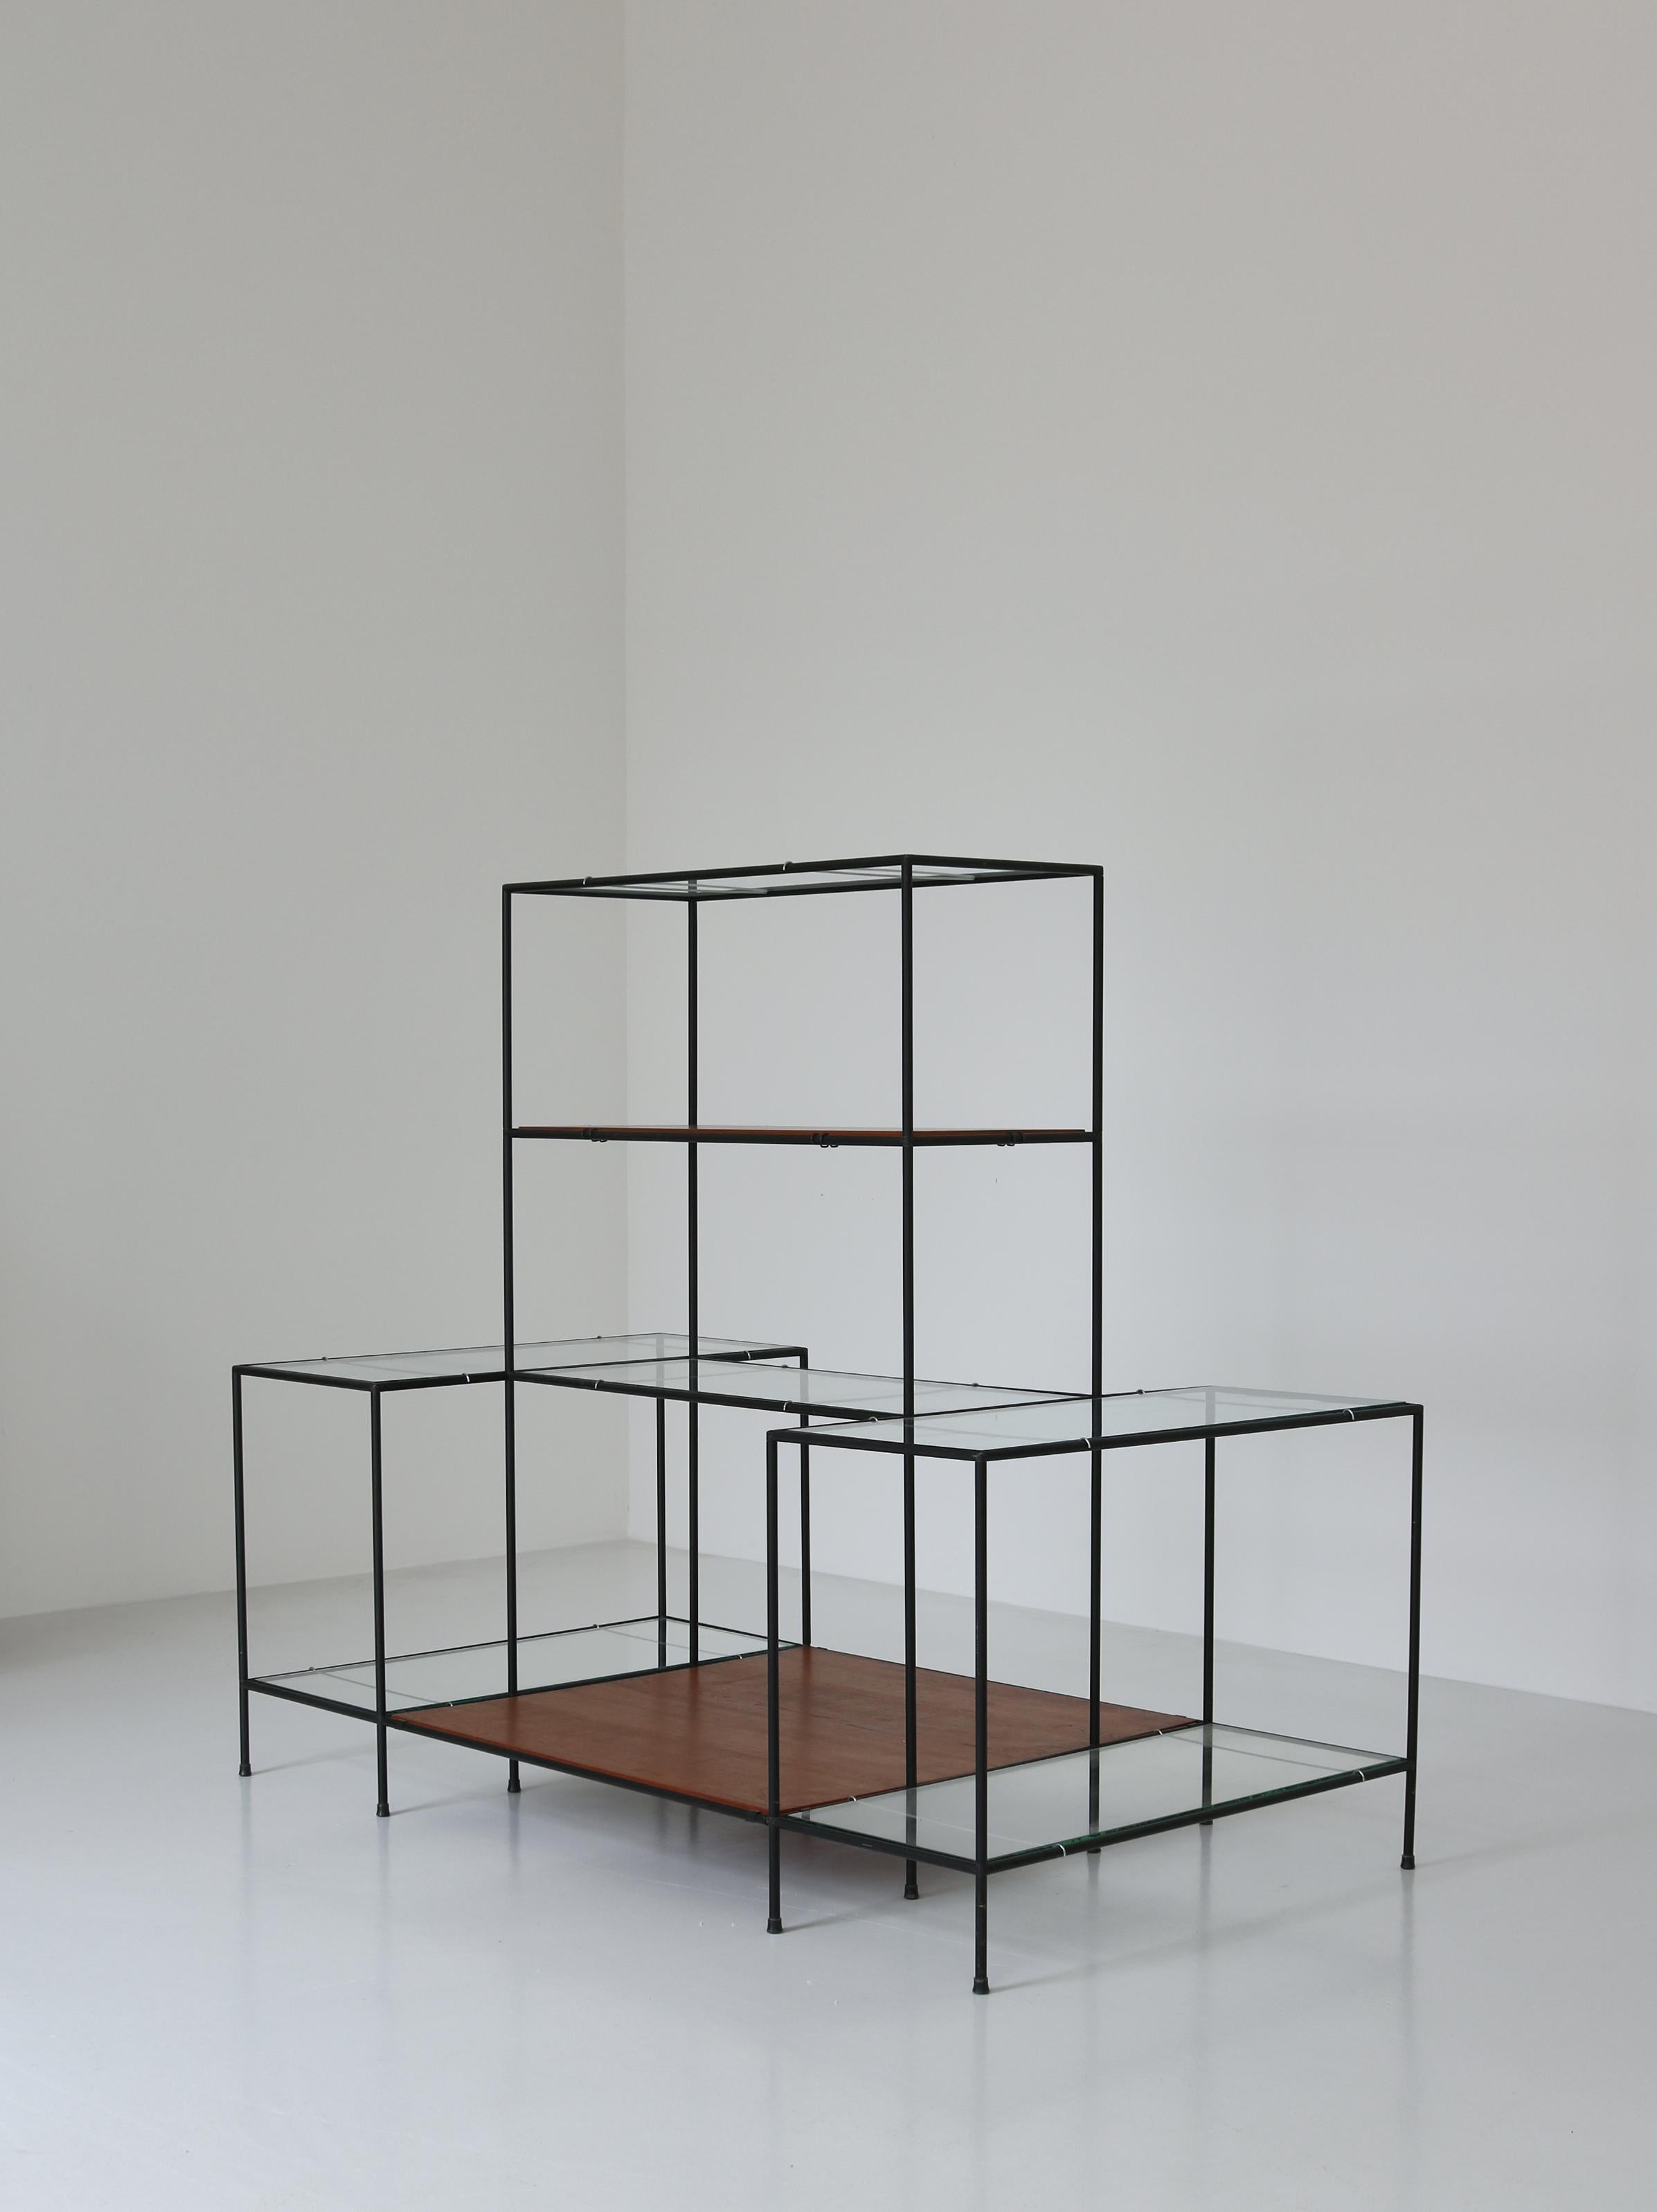 Ingenious minimalist shelving or display unit SYSTEM ABSTRACTA designed by Poul Cadovius, Denmark, in the 1960s. The system consists of black metal tubes with patented connectors, floating teak wood and thick glass shelves. The minimalistic and